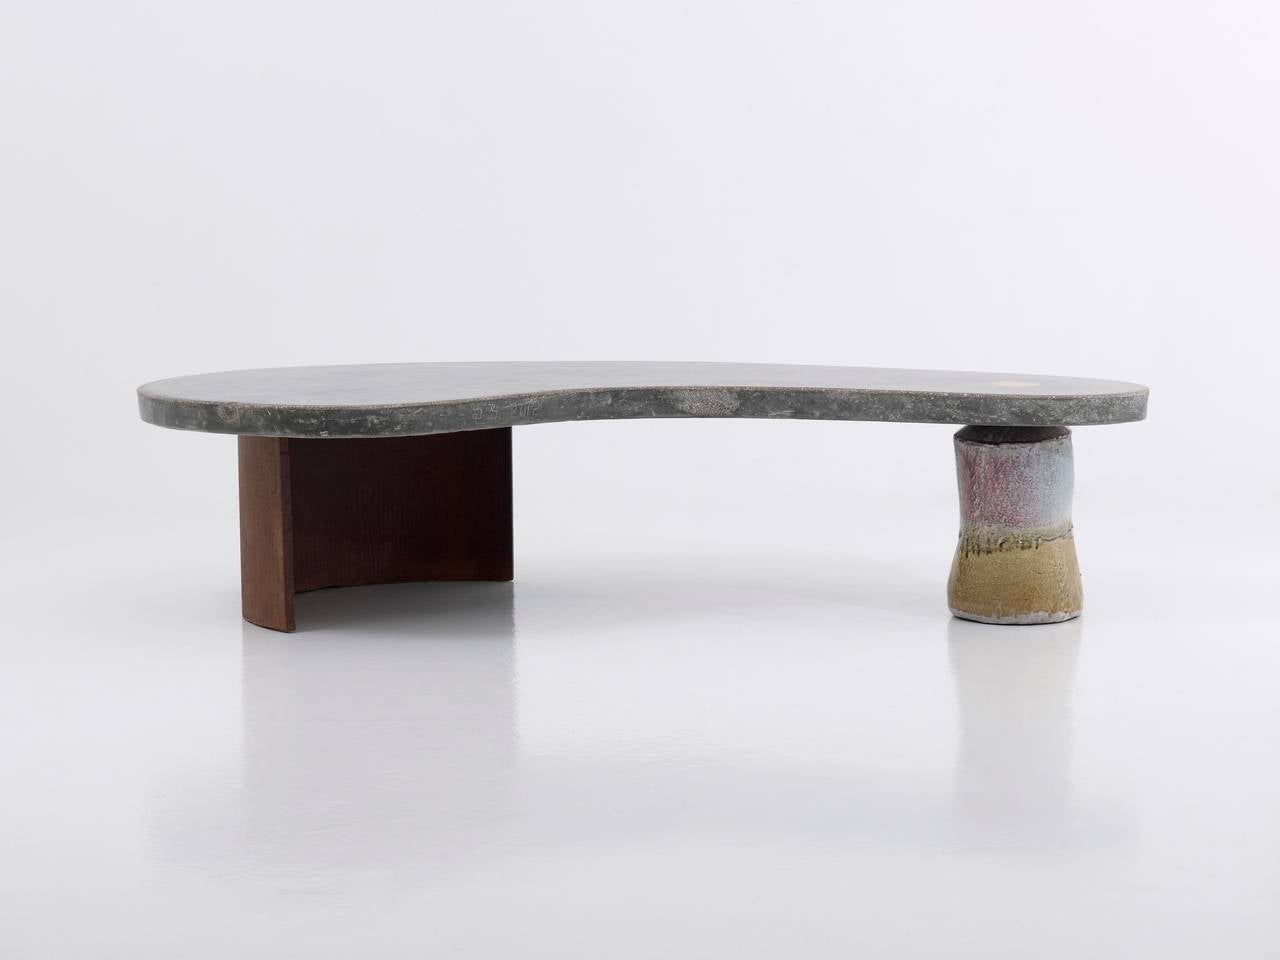 Organic Lined Concrete Bench by Lee Hun Chung, 2012 In Excellent Condition For Sale In West Hollywood, CA